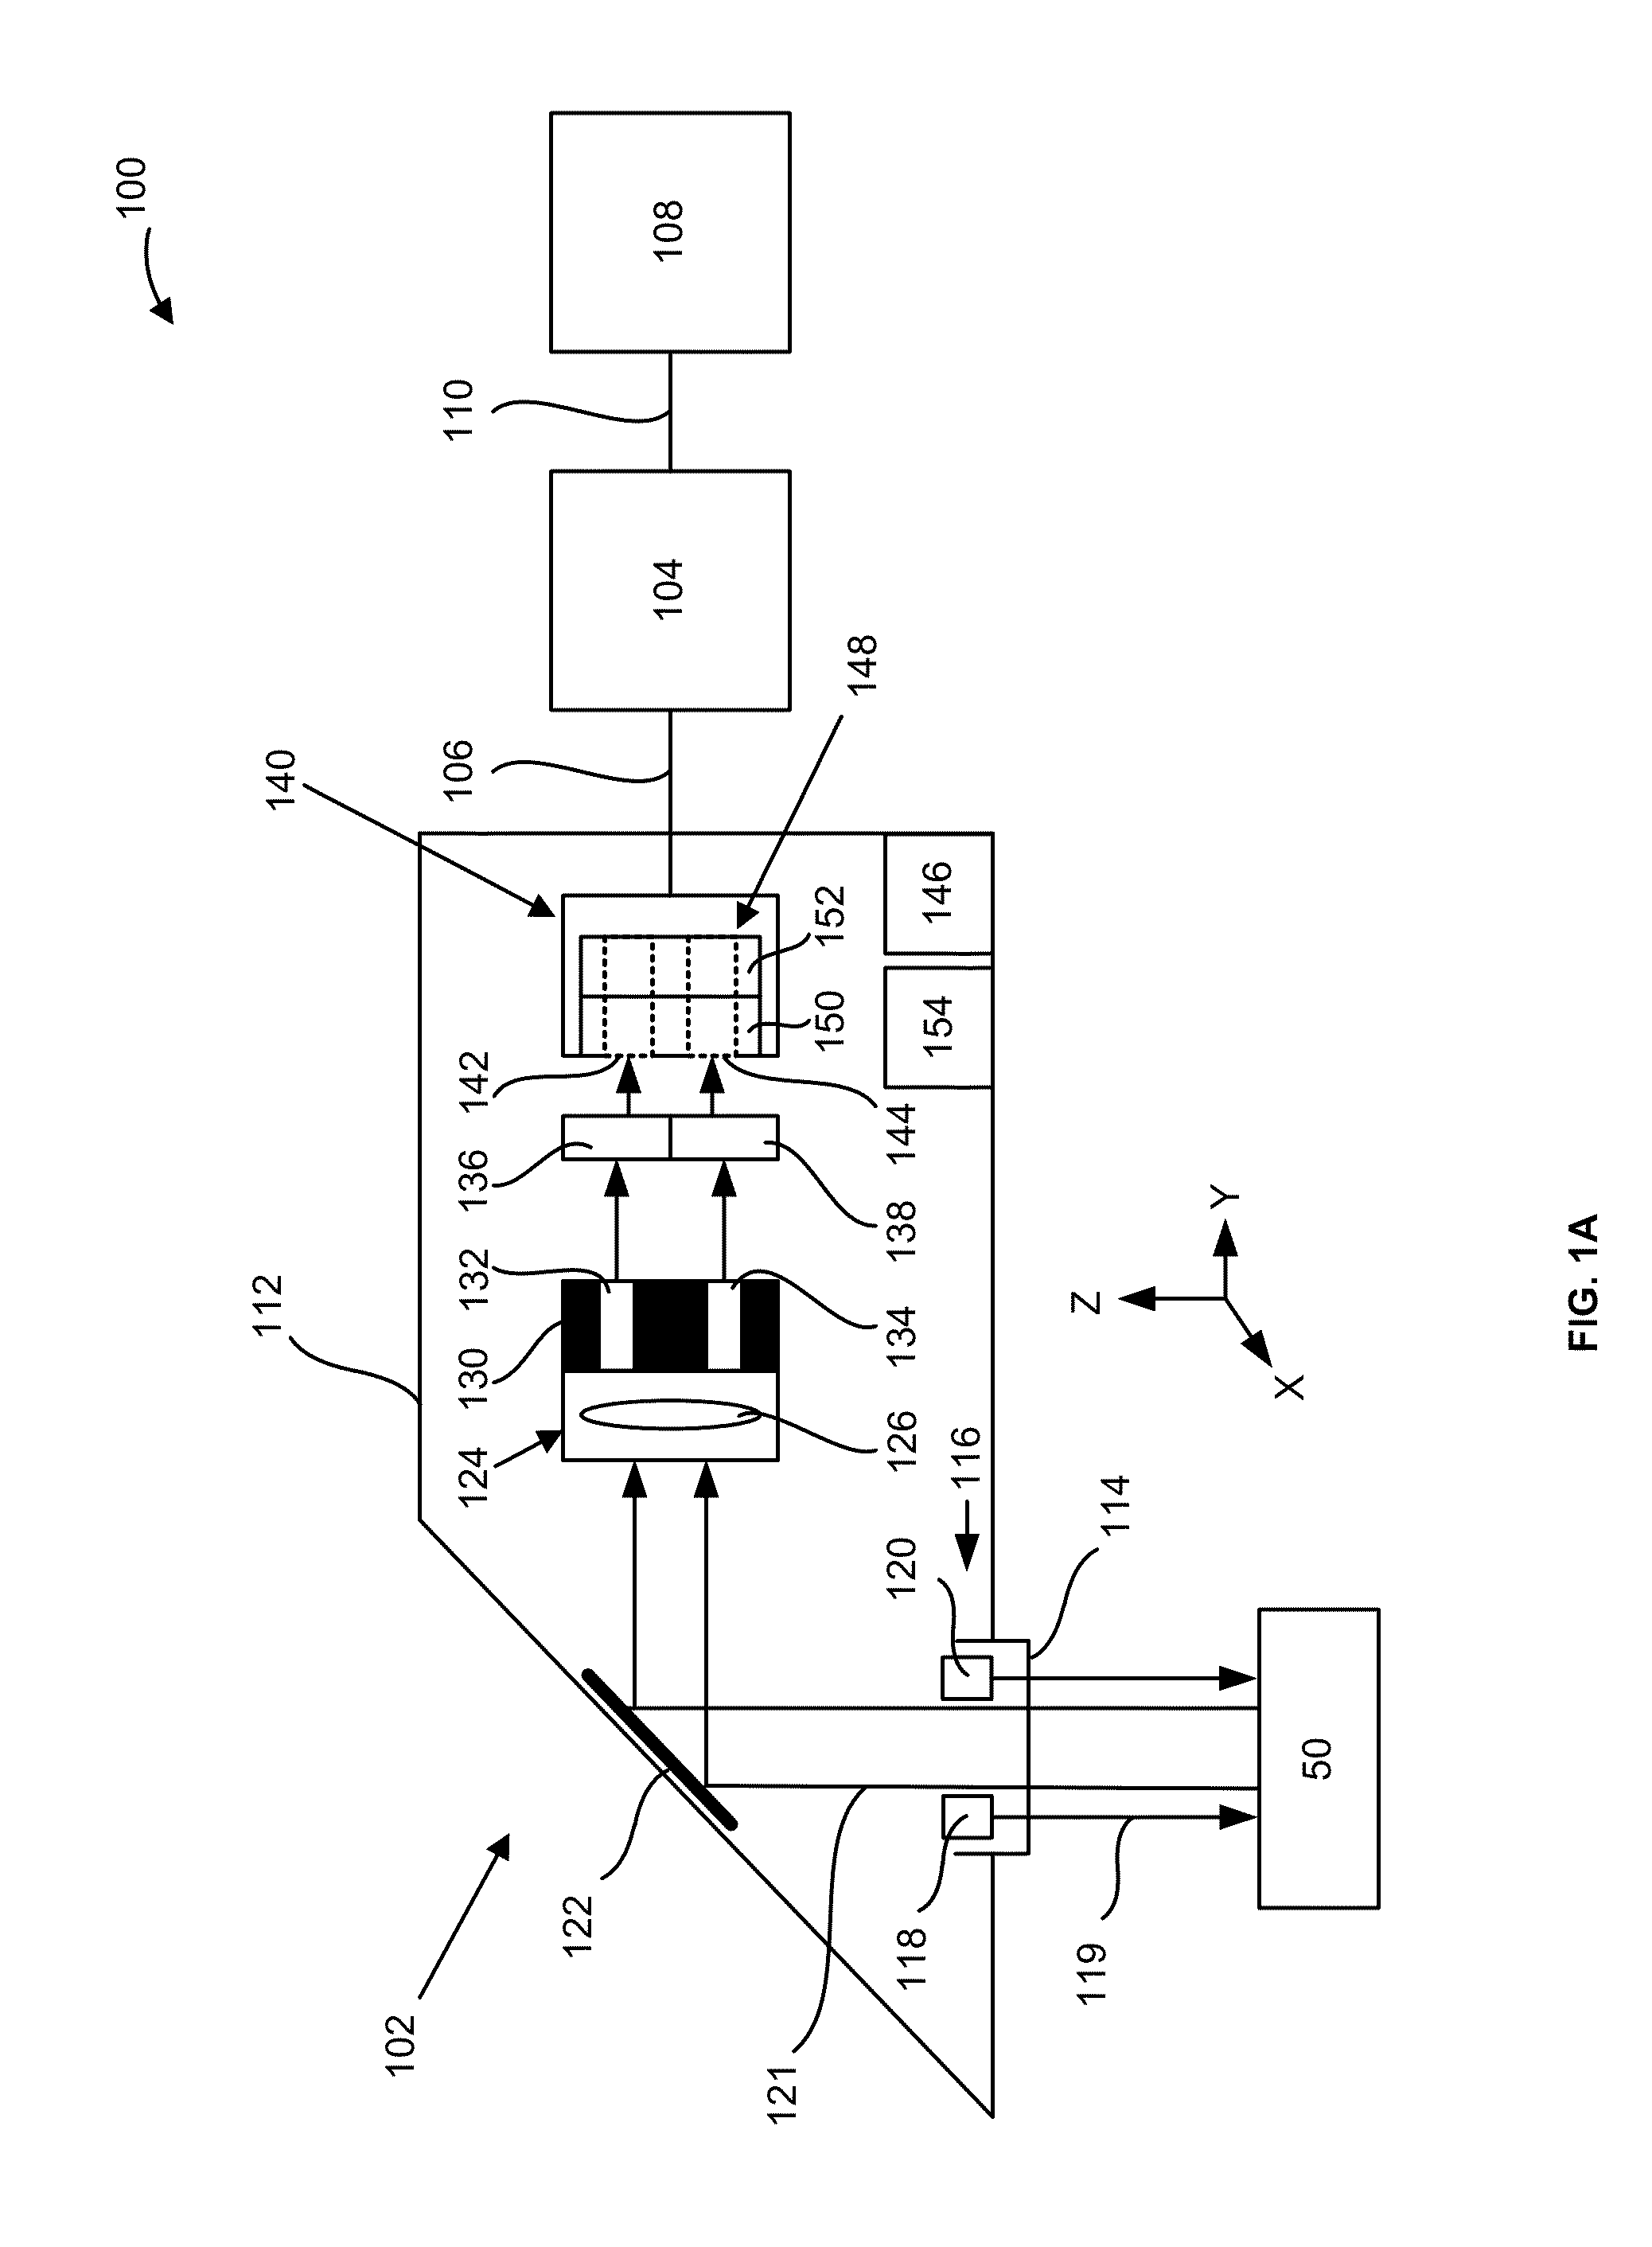 Systems, methods, apparatuses, and computer-readable storage media for collecting color information about an object undergoing a 3D scan